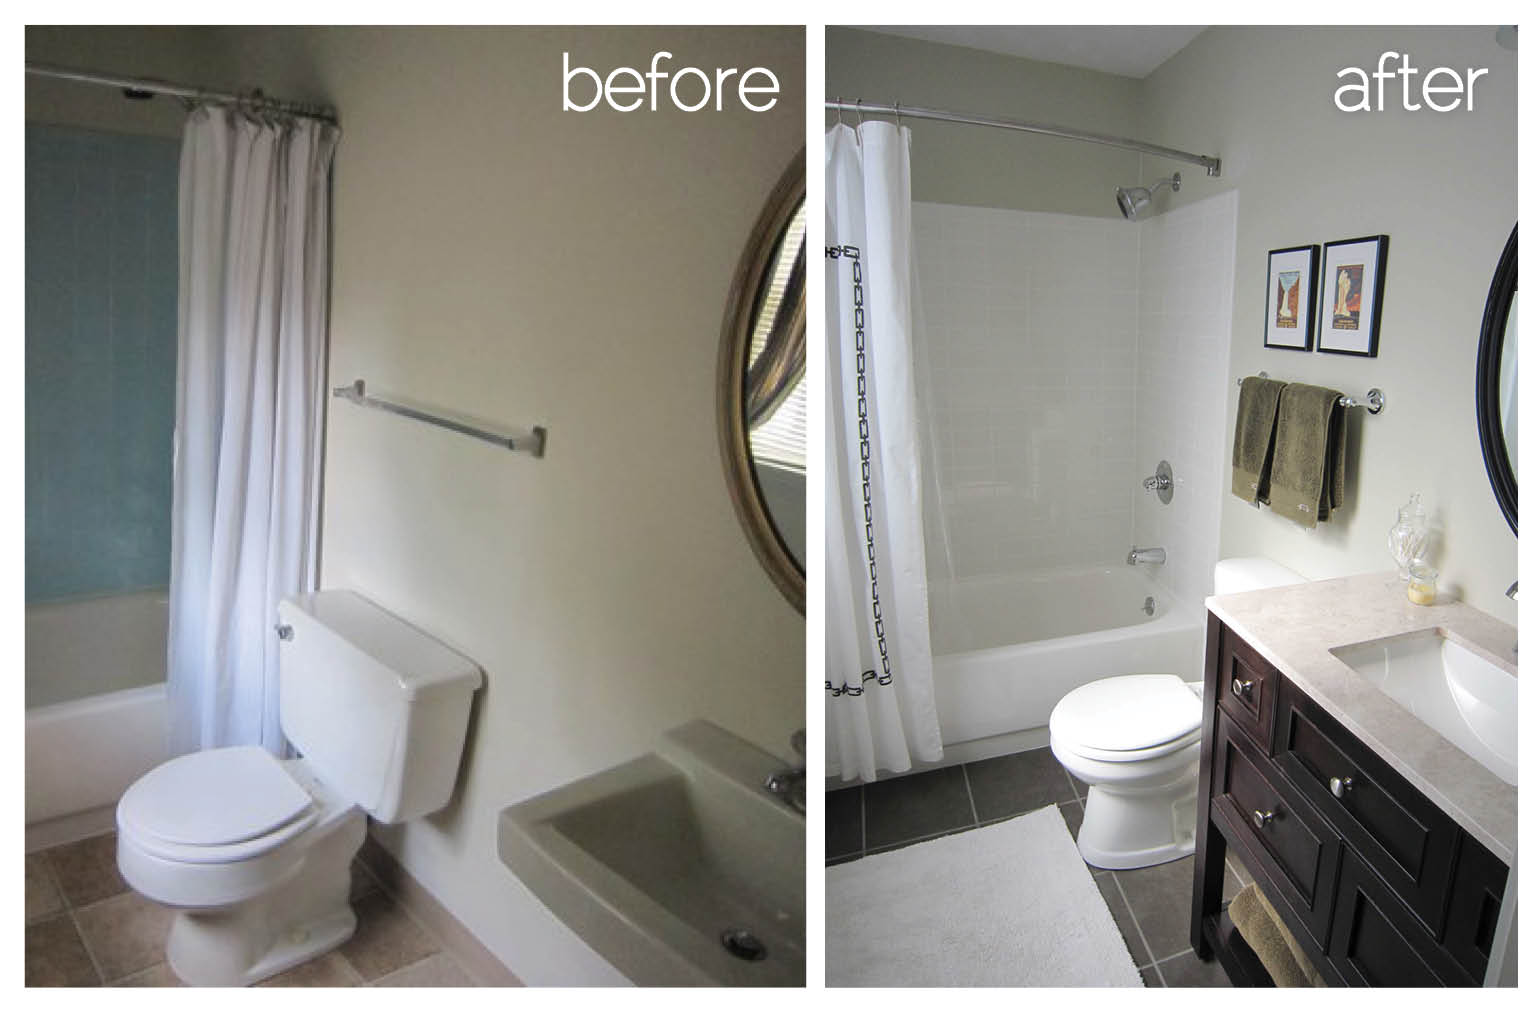 Cozy Fresh and Cheap Bathroom Remodel | AnOceanView.com ~ Home Design Magazine  for cheap bathroom remodel